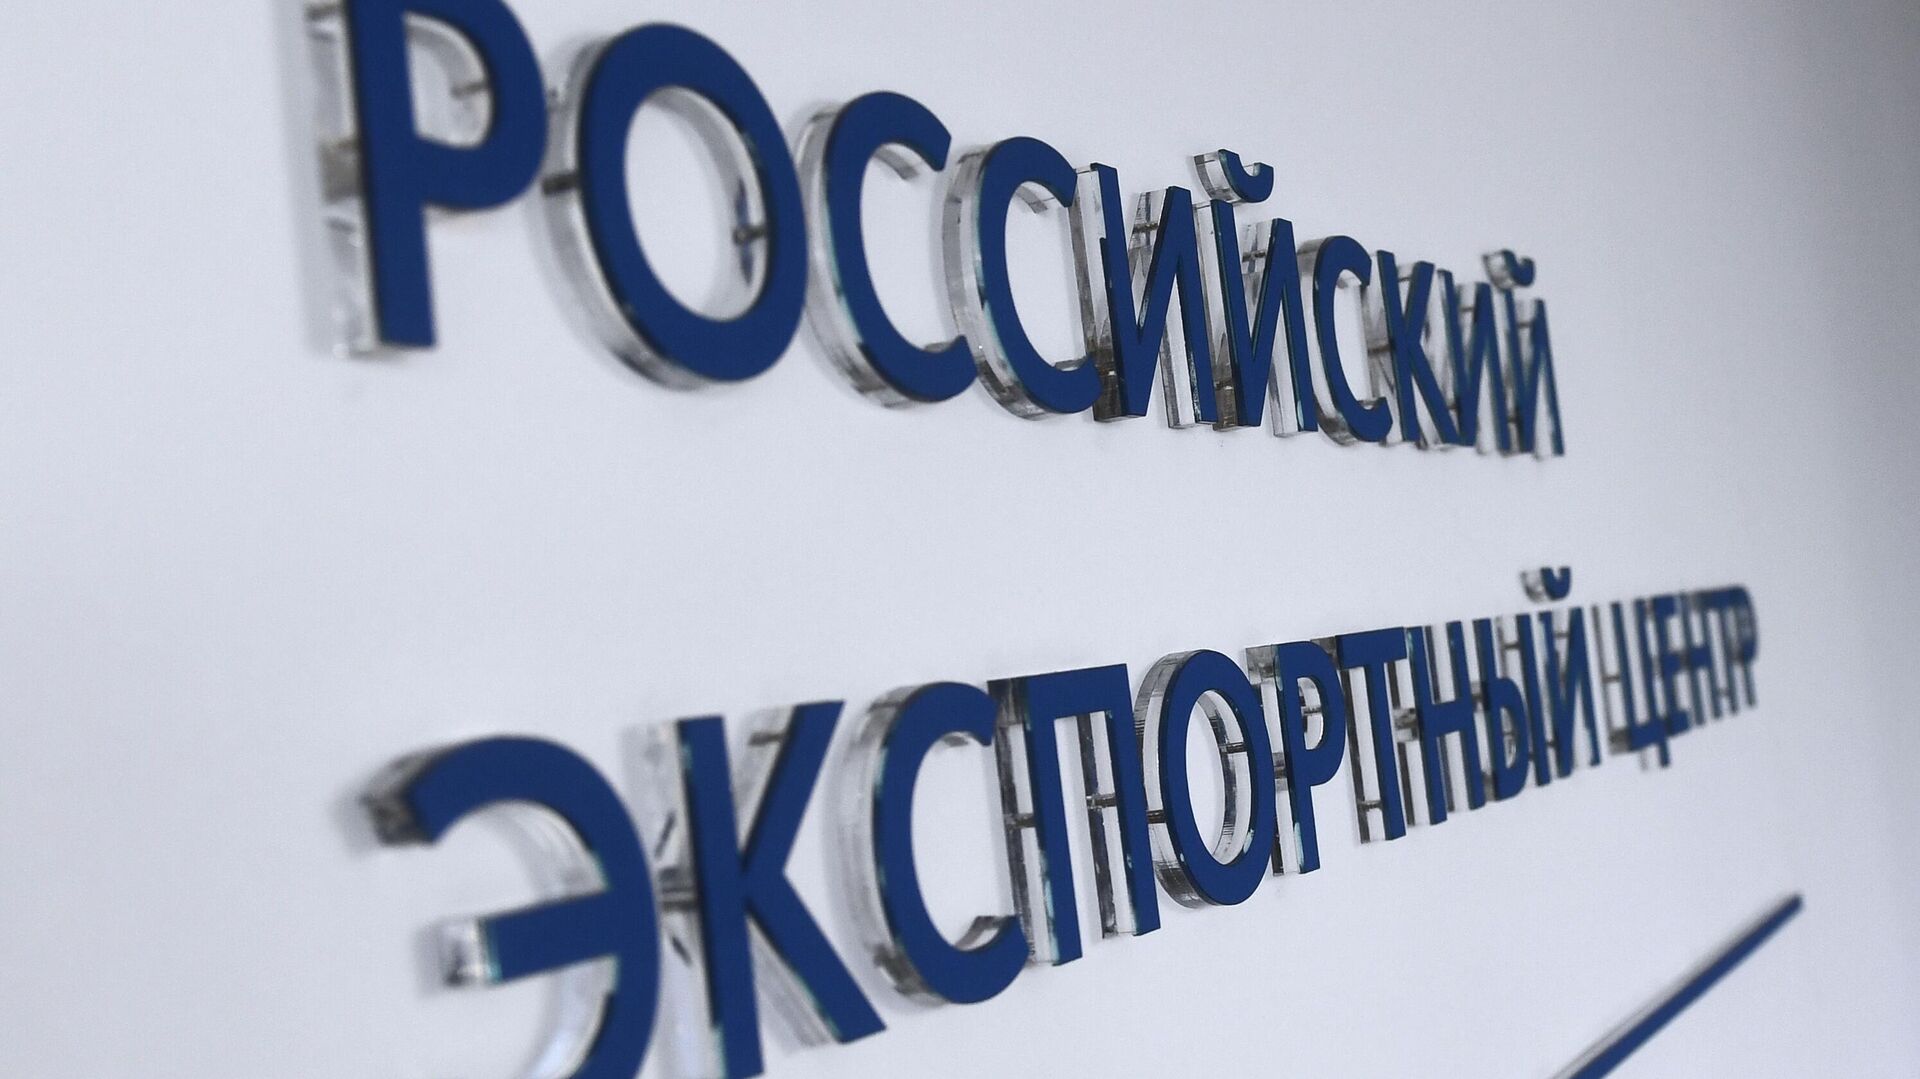 Russian Export Center supported 311 companies in the Leningrad Region in 2022